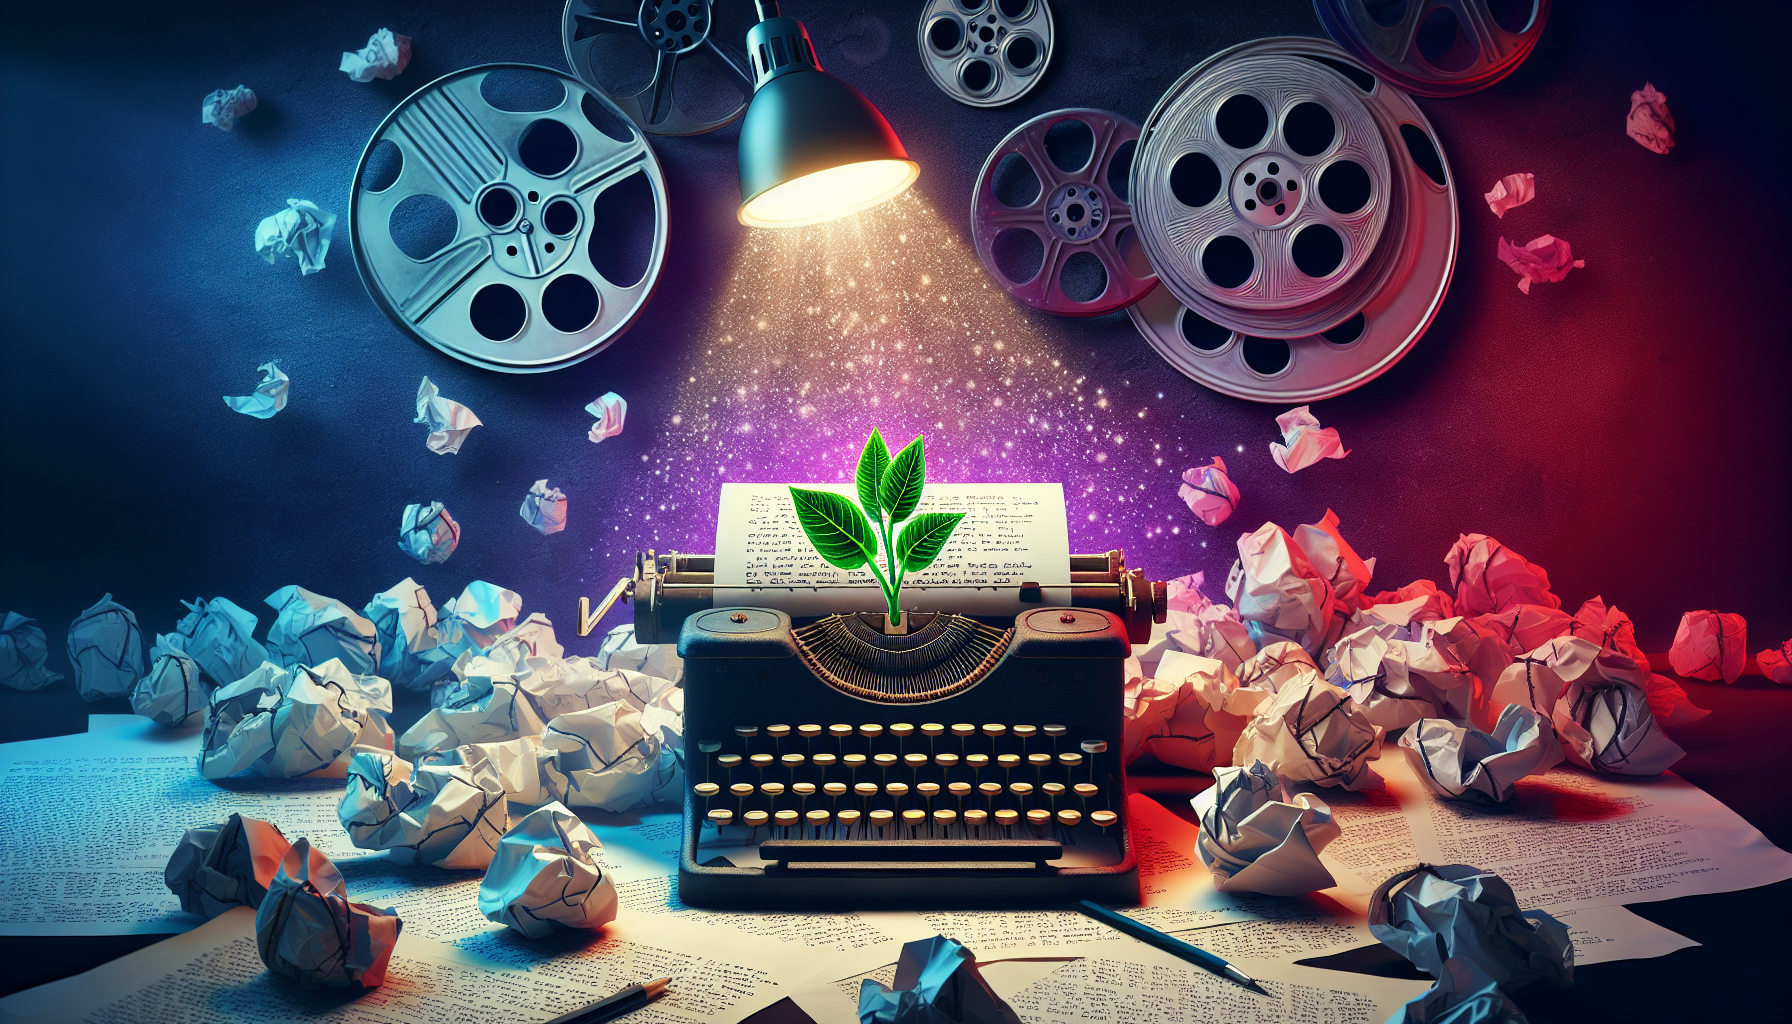 A vintage typewriter surrounded by crumpled paper under a spotlight, with a budding plant growing out of an open screenplay, set against a backdrop of movie reels and scripts.